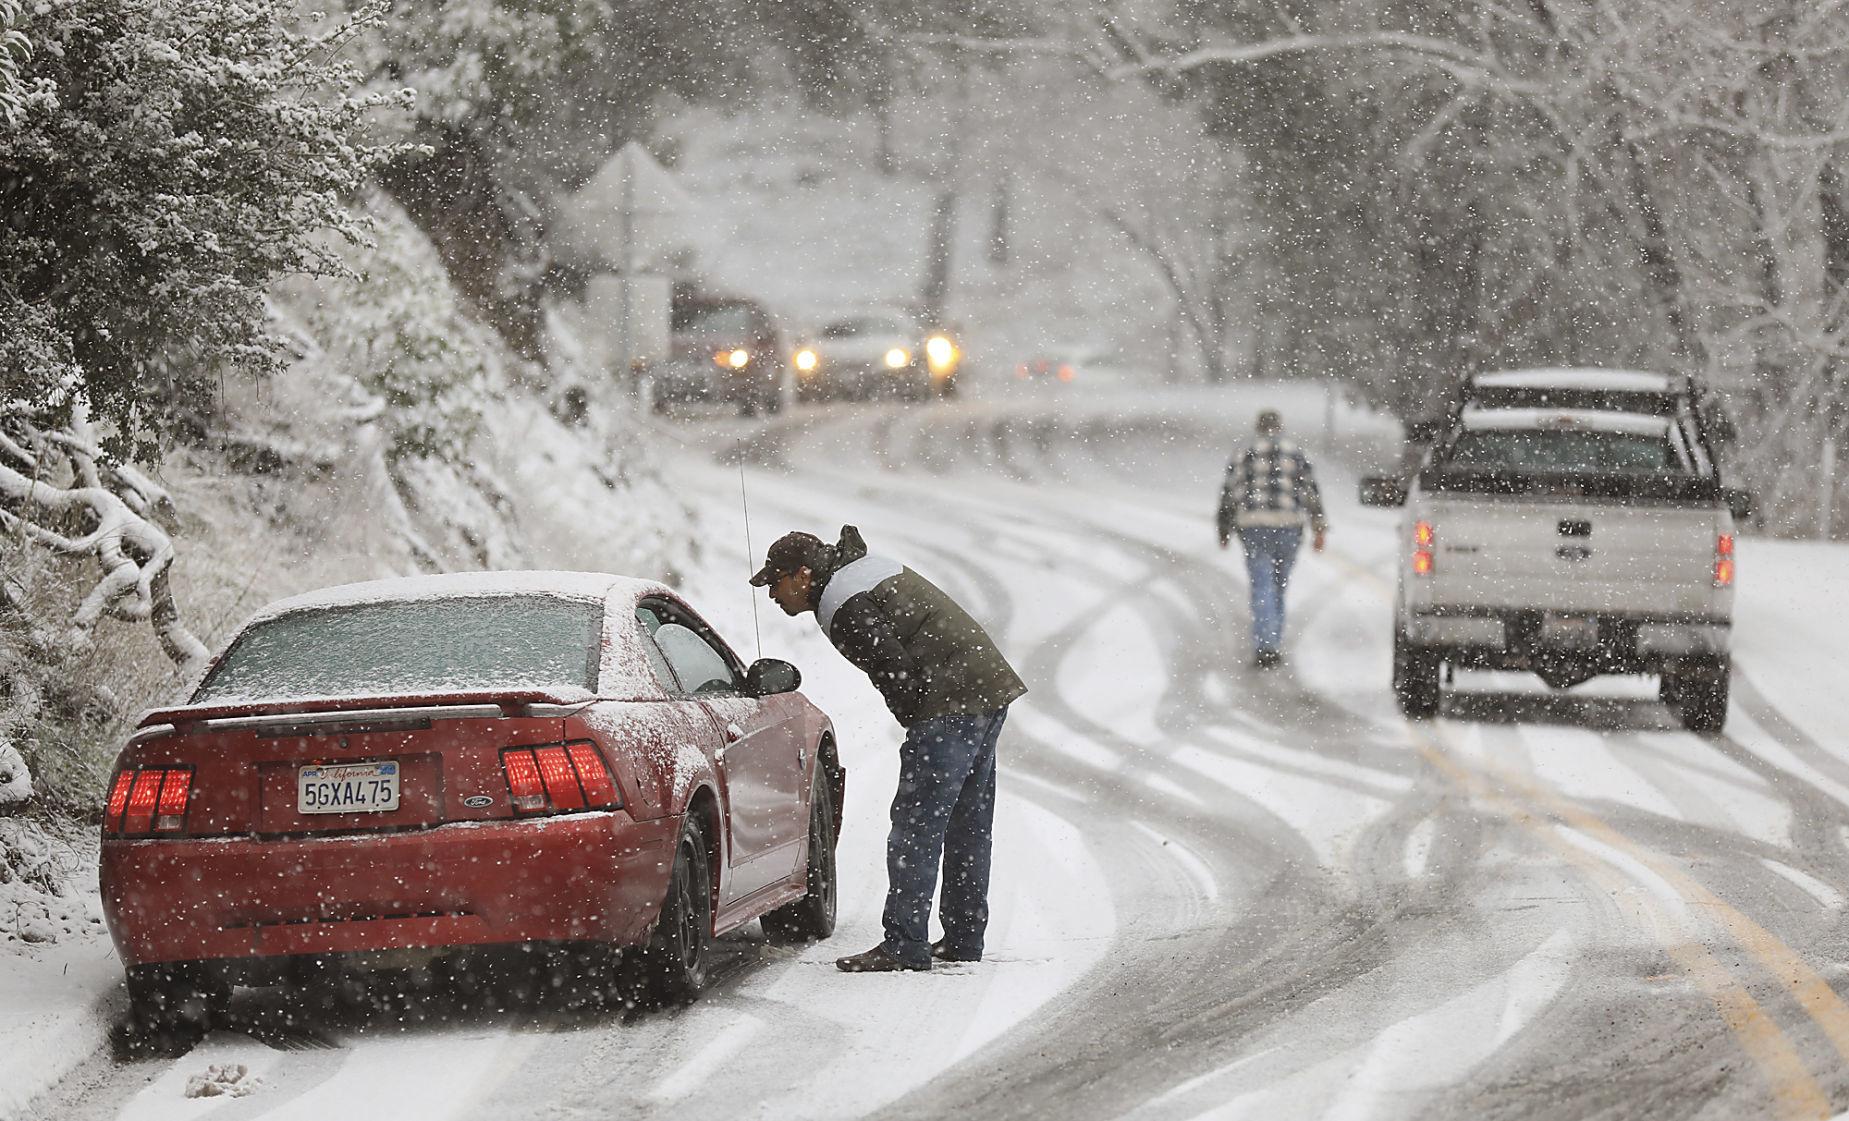 Snow in San Francisco? Mild cities don't escape winter storm Nation